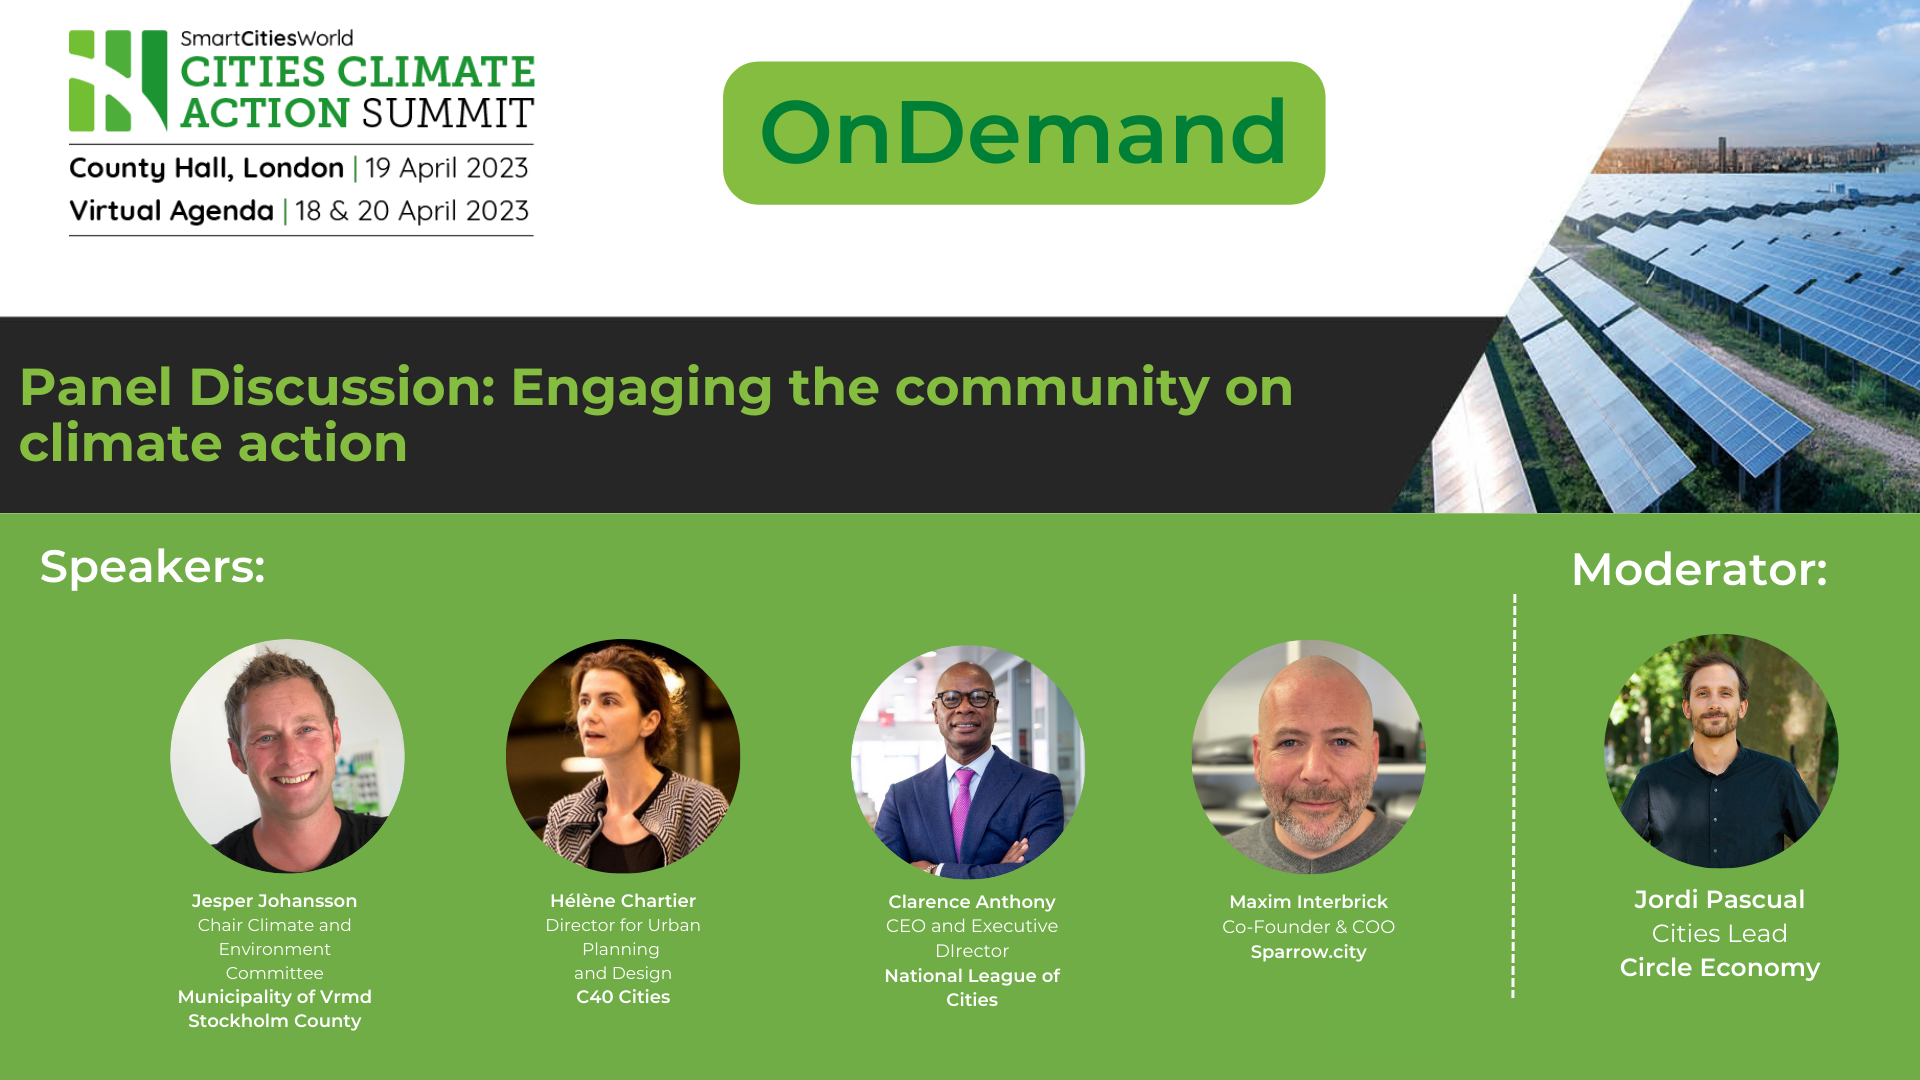 OnDemand Panel discussion: Engaging the community on climate action